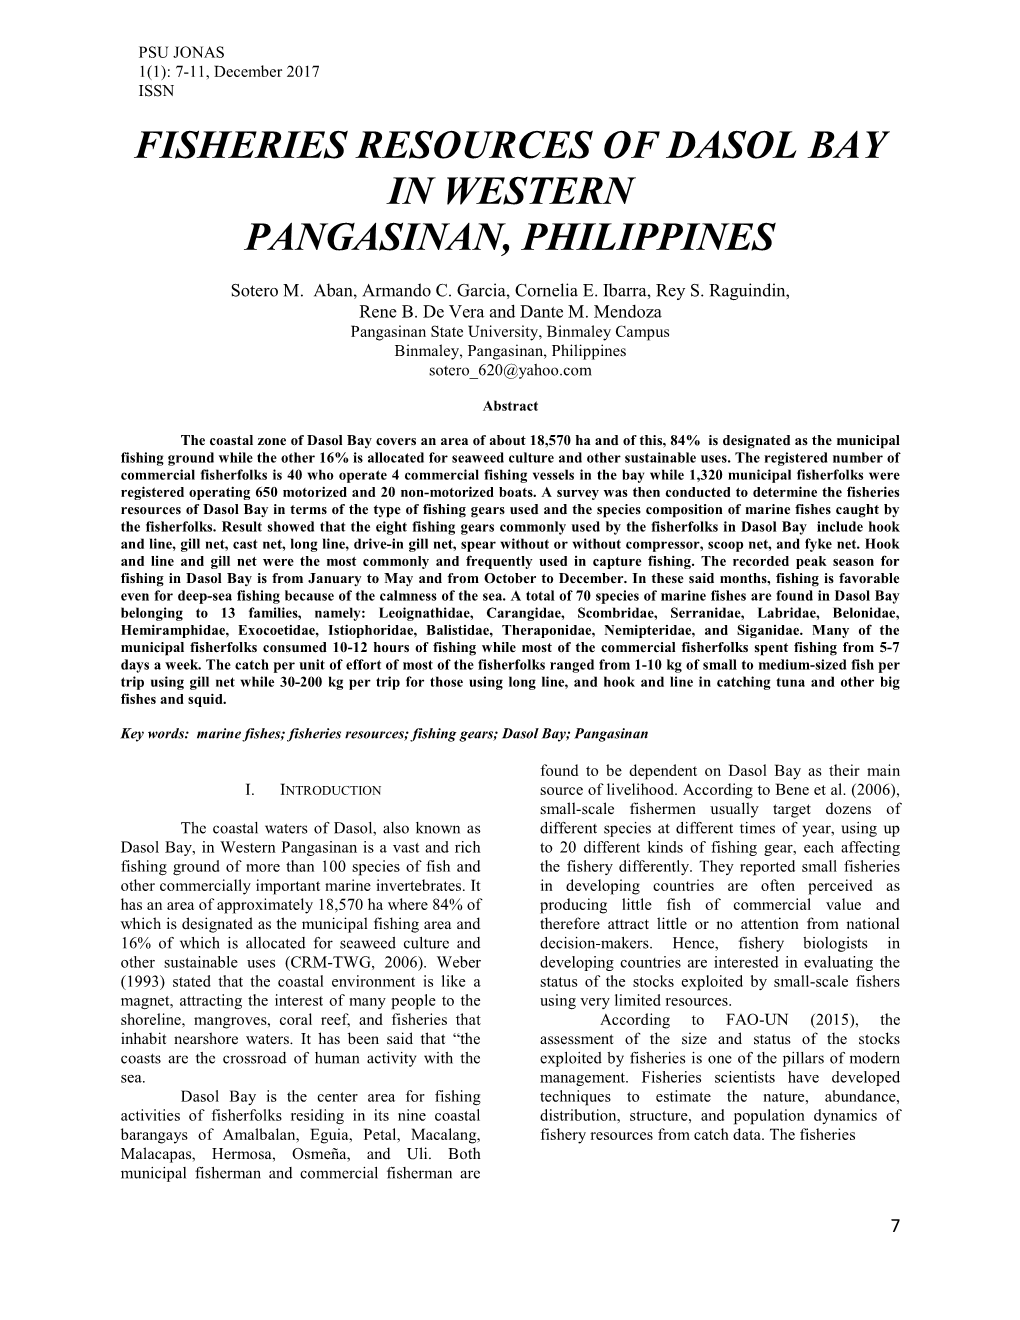 Fisheries Resources of Dasol Bay in Western Pangasinan, Philippines